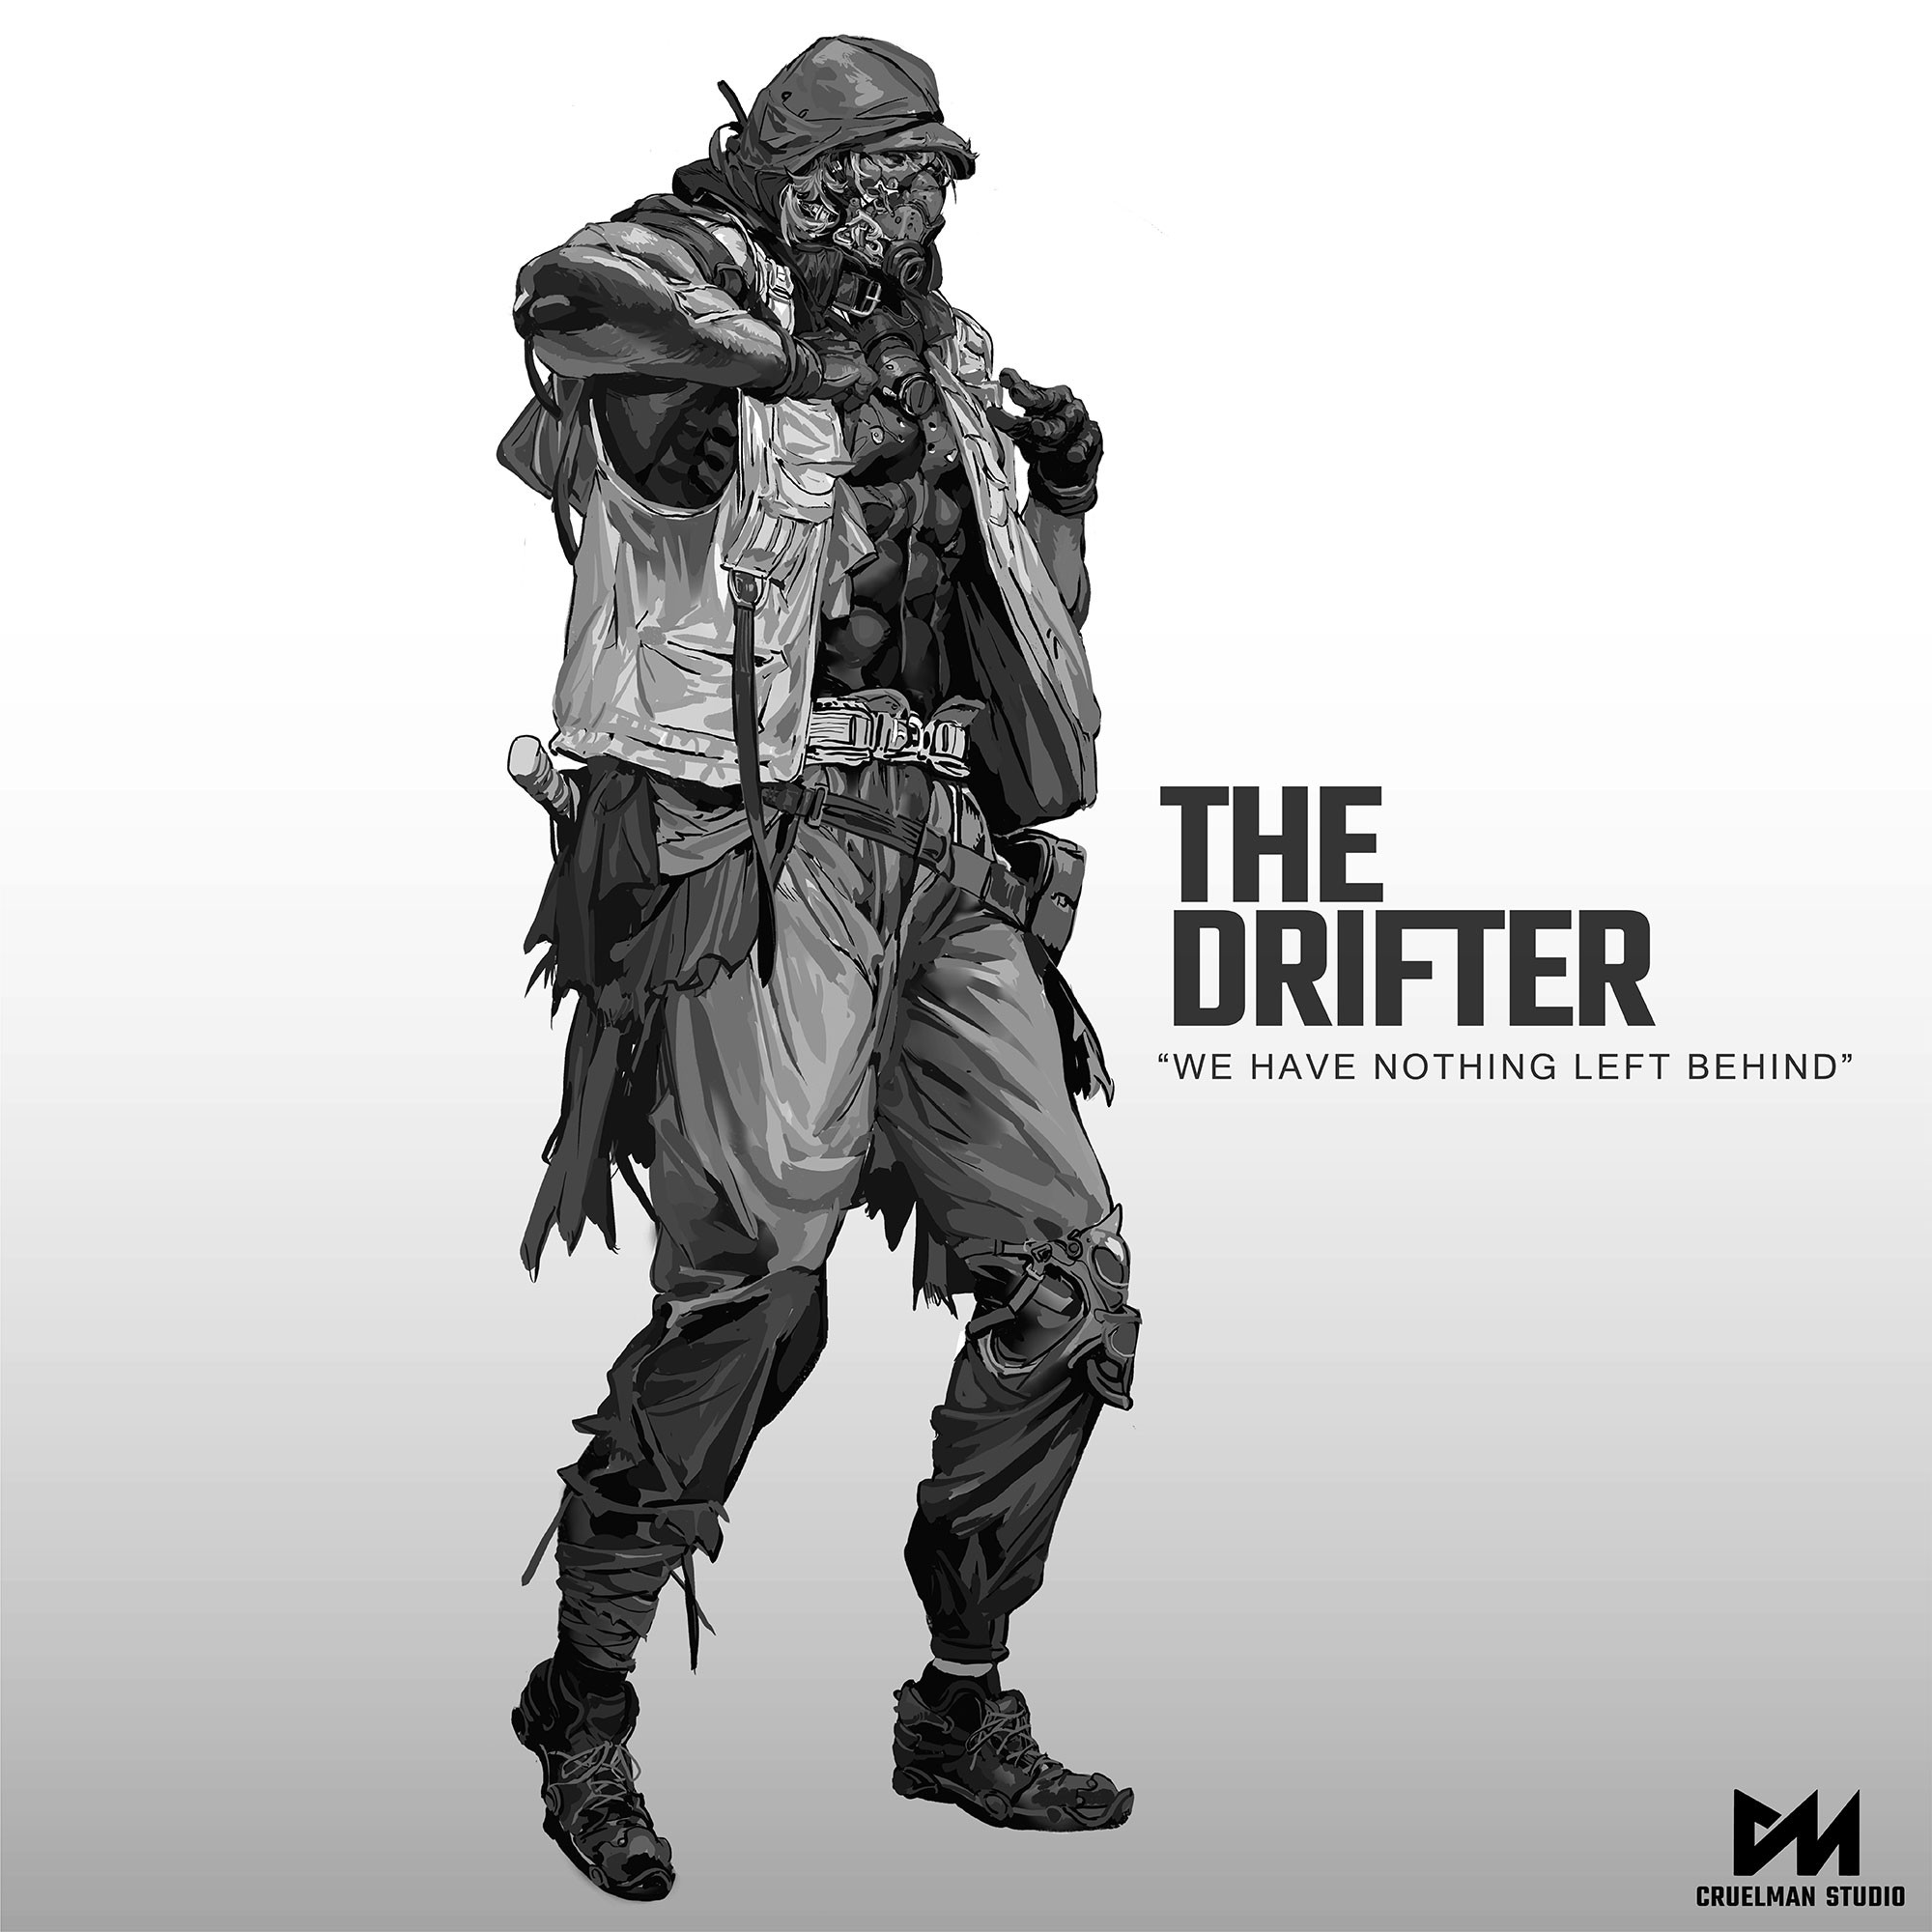 The Drifter
Jared